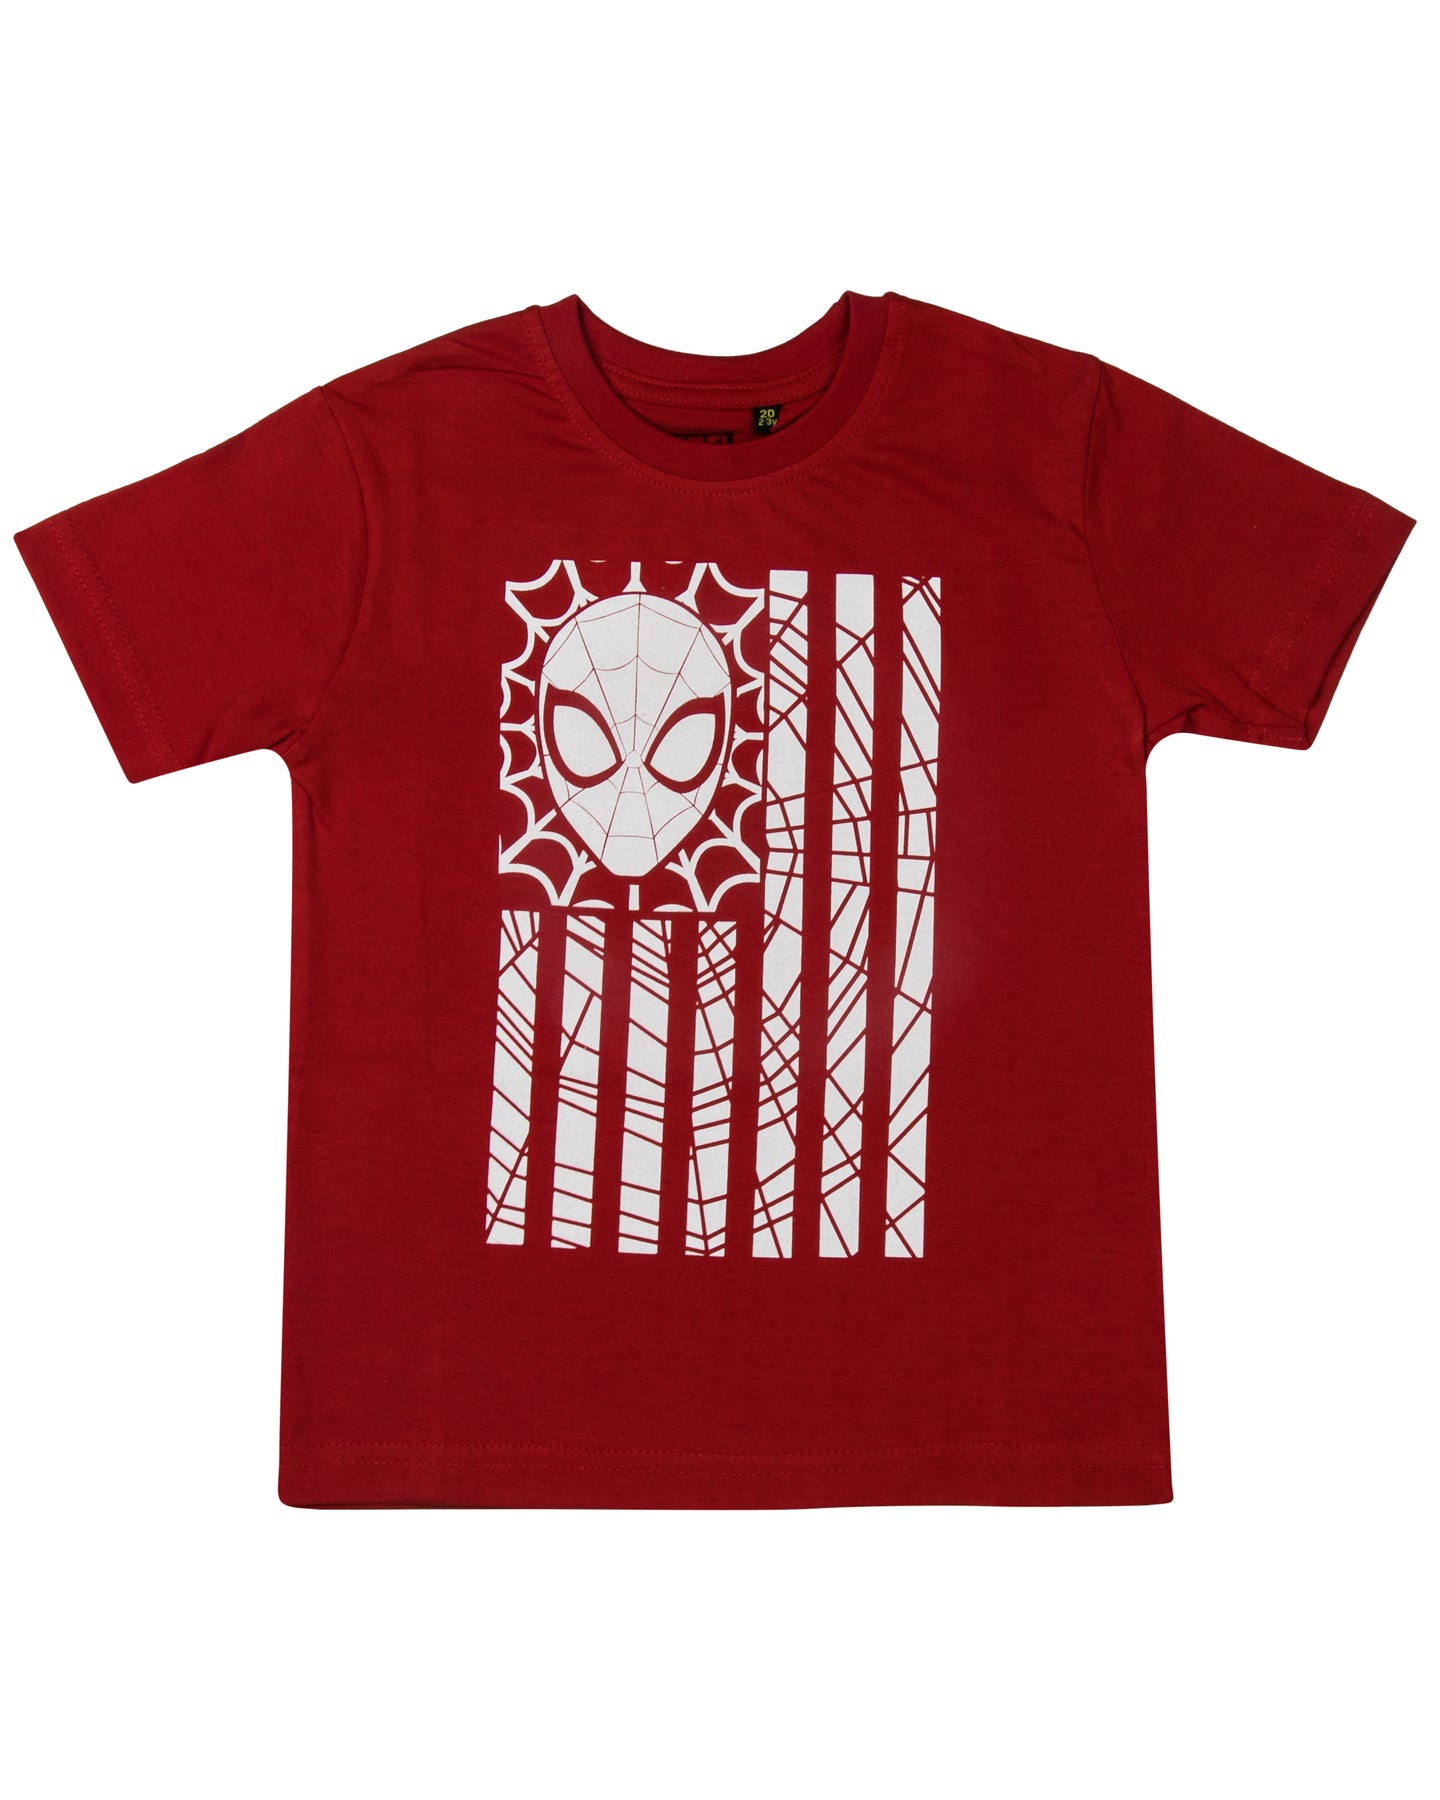 Spiderman Boys Casual T-shirt Red